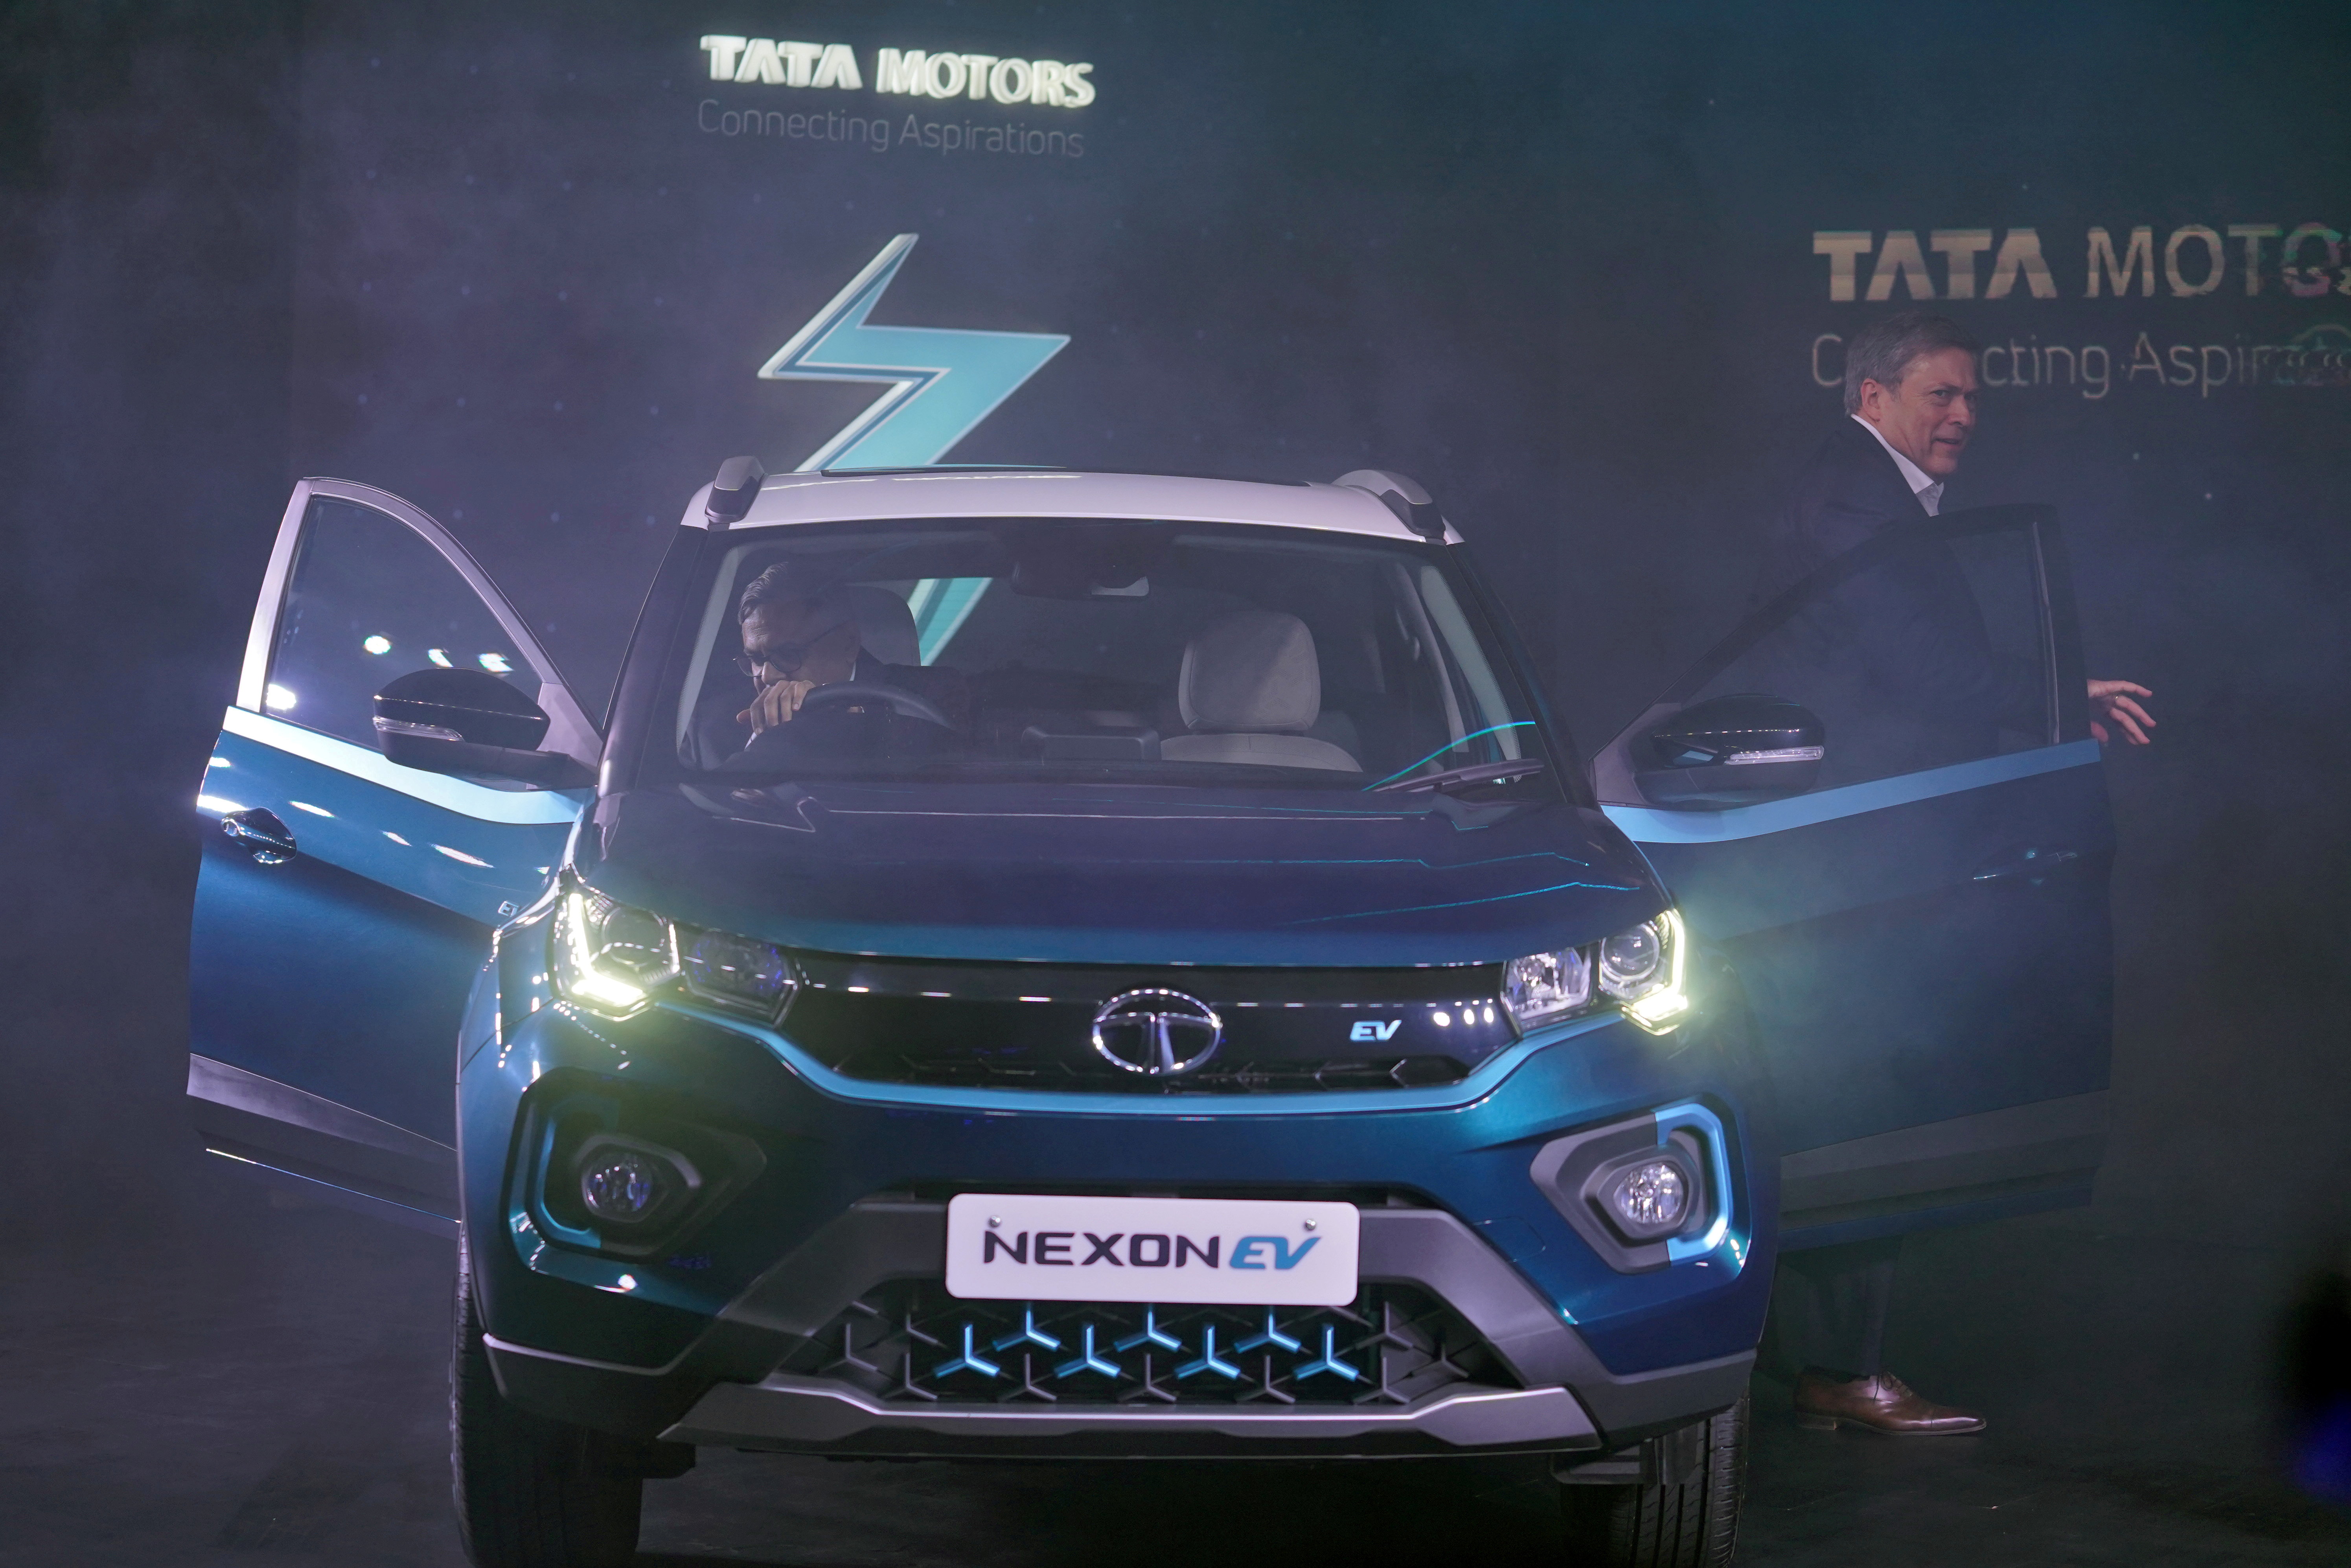 Natarajan Chandrasekaran, Chairman of Tata Sons, sits inside the company's electric sport-utility vehicle (SUV) Nexon EV next to Guenter Butschek, CEO and Managing Director at Tata Motors, during the launch of the vehicle in Mumbai